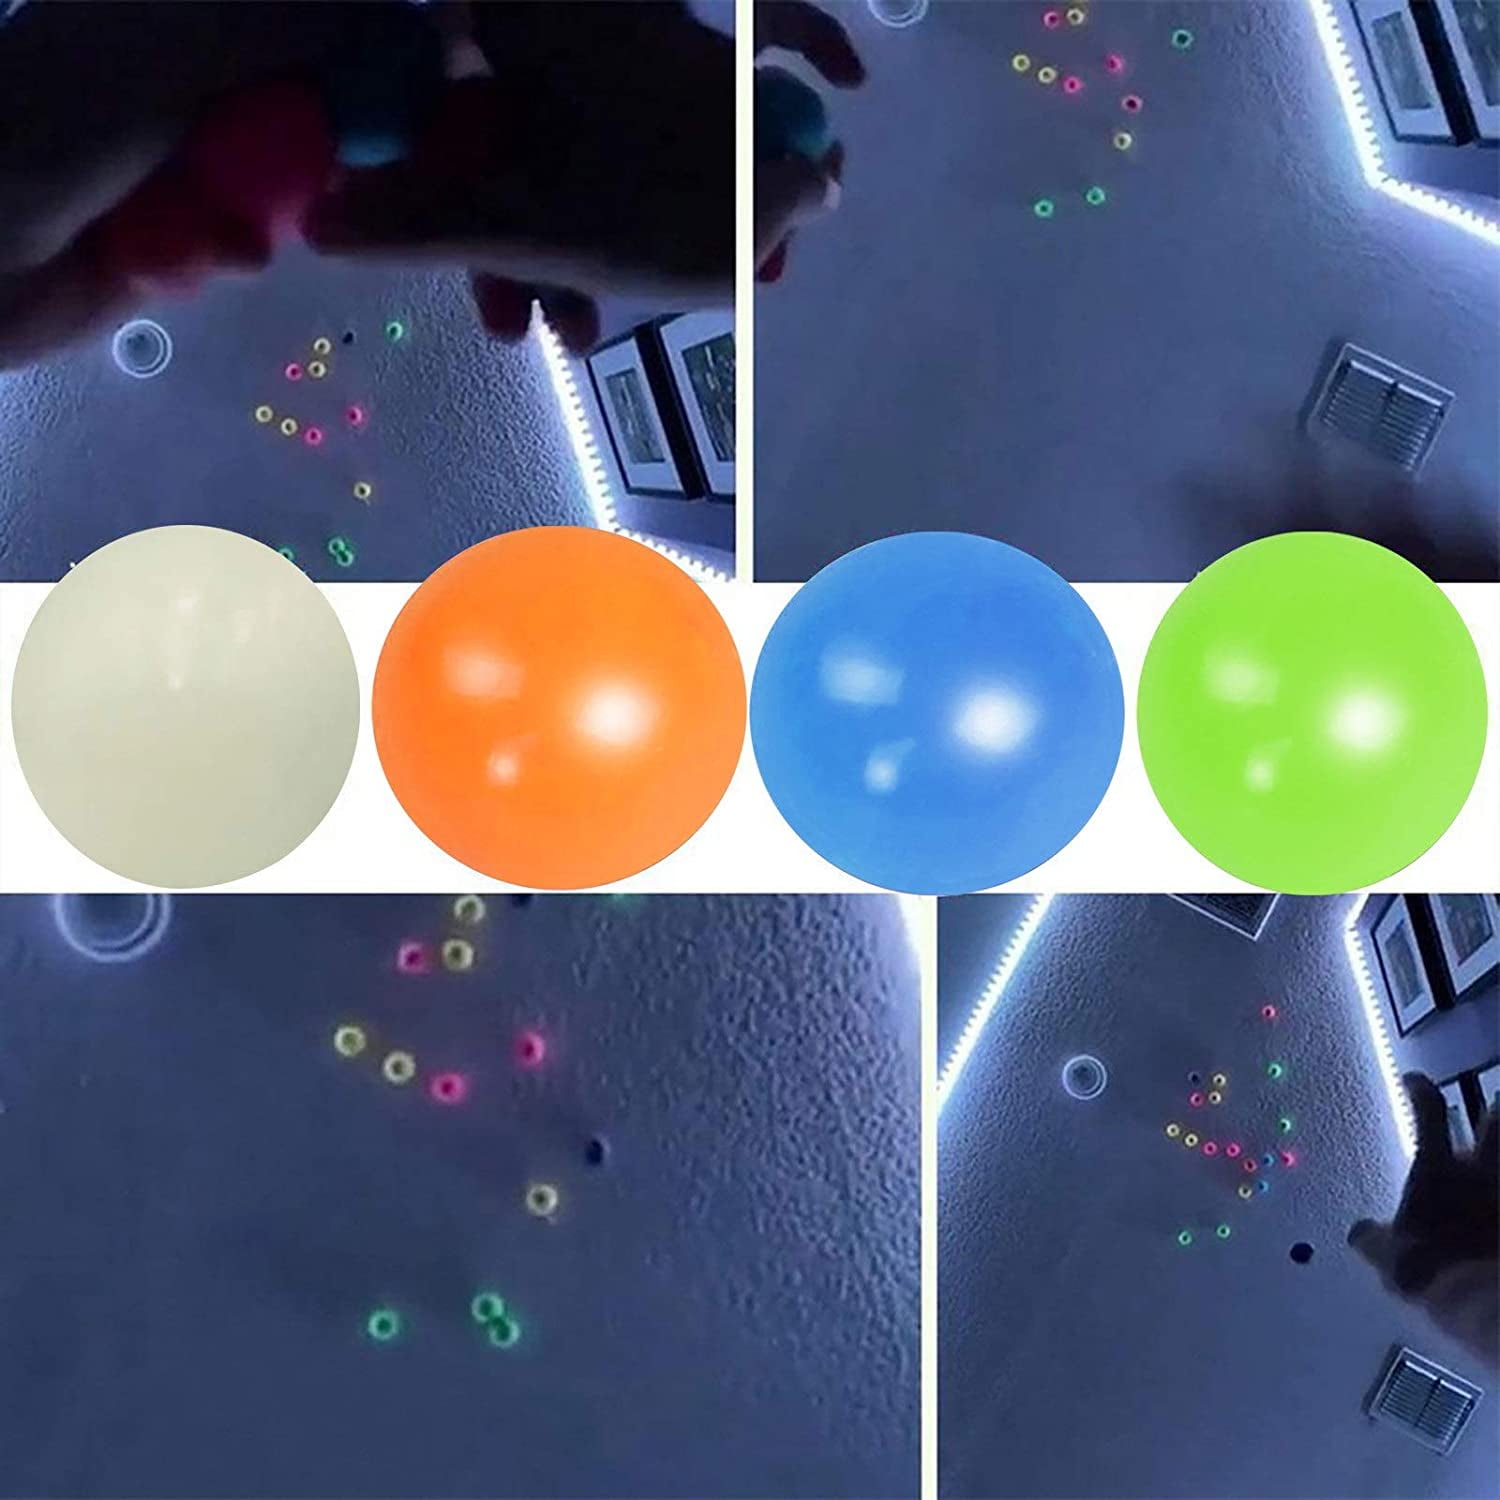 Sticky Wall Balls for Kids Toys Ceiling Stress Relief Globbles Squishy Relief 4* 